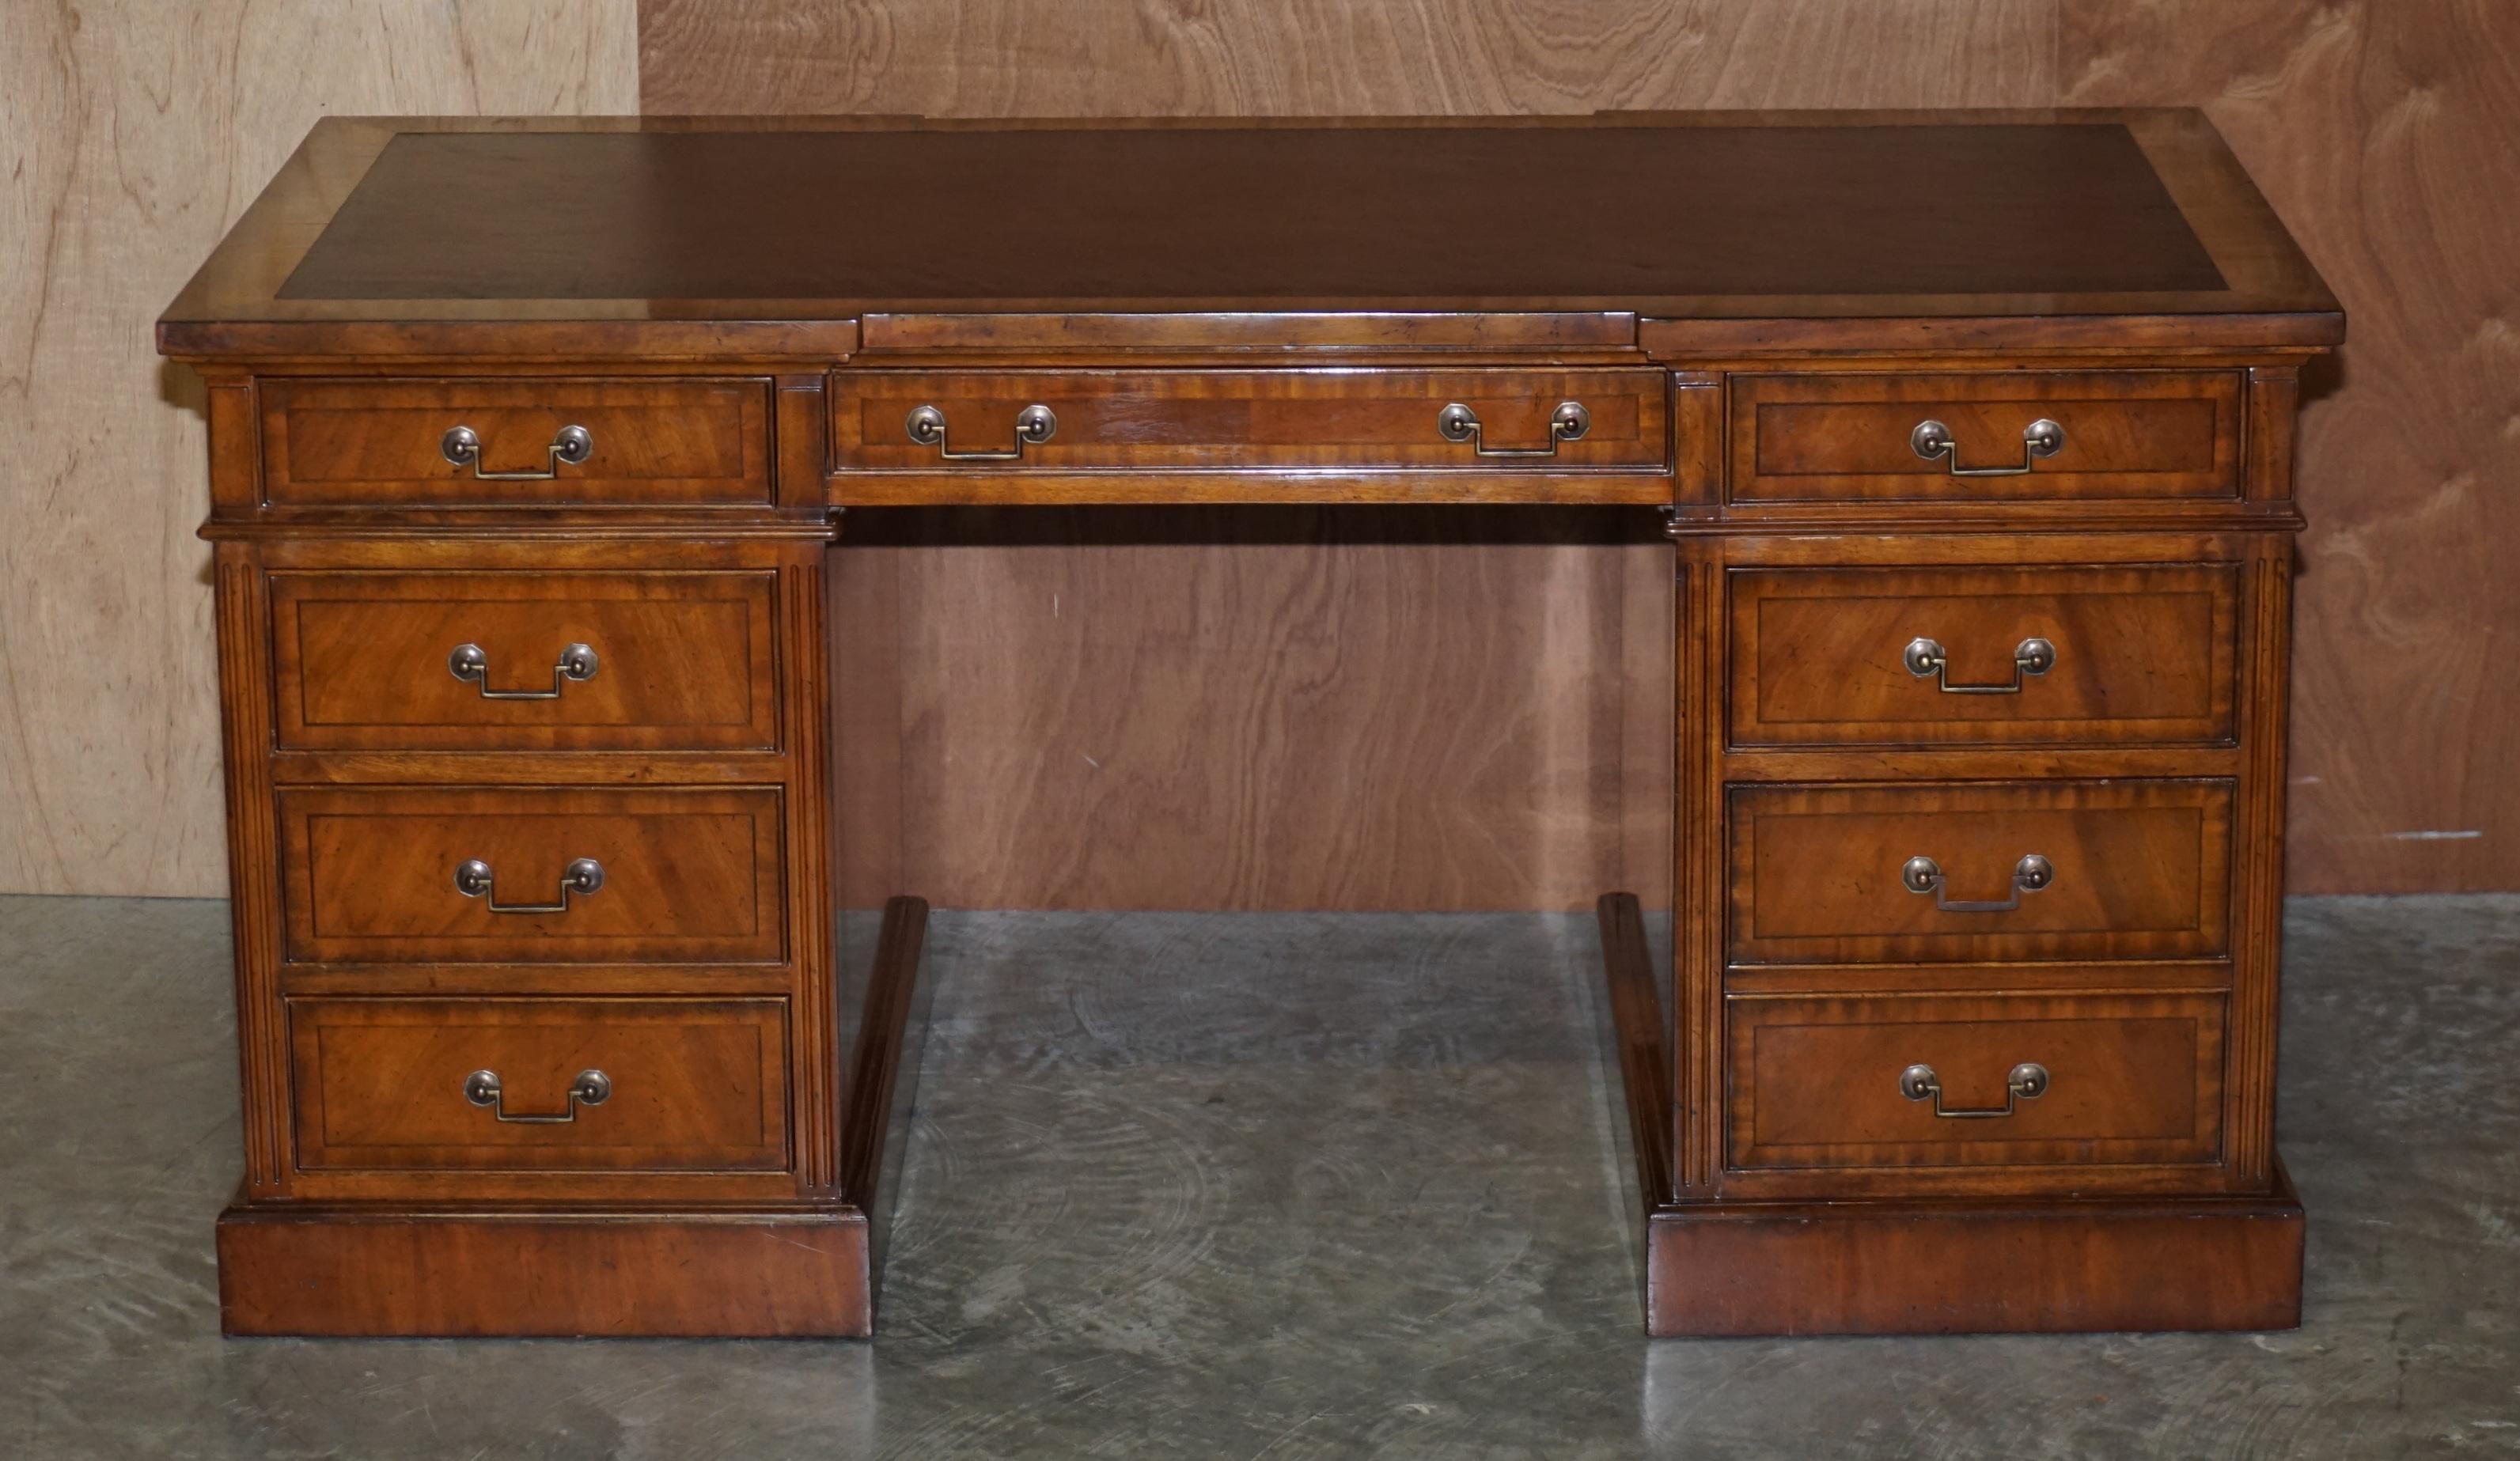 We are delighted to offer this stunning double sided flamed mahogany with brown leather Brights of Nettlebed, inverted breakfront pedestal desk that is double sided

A very good looking well made and decorative partners desk. It is double sided in